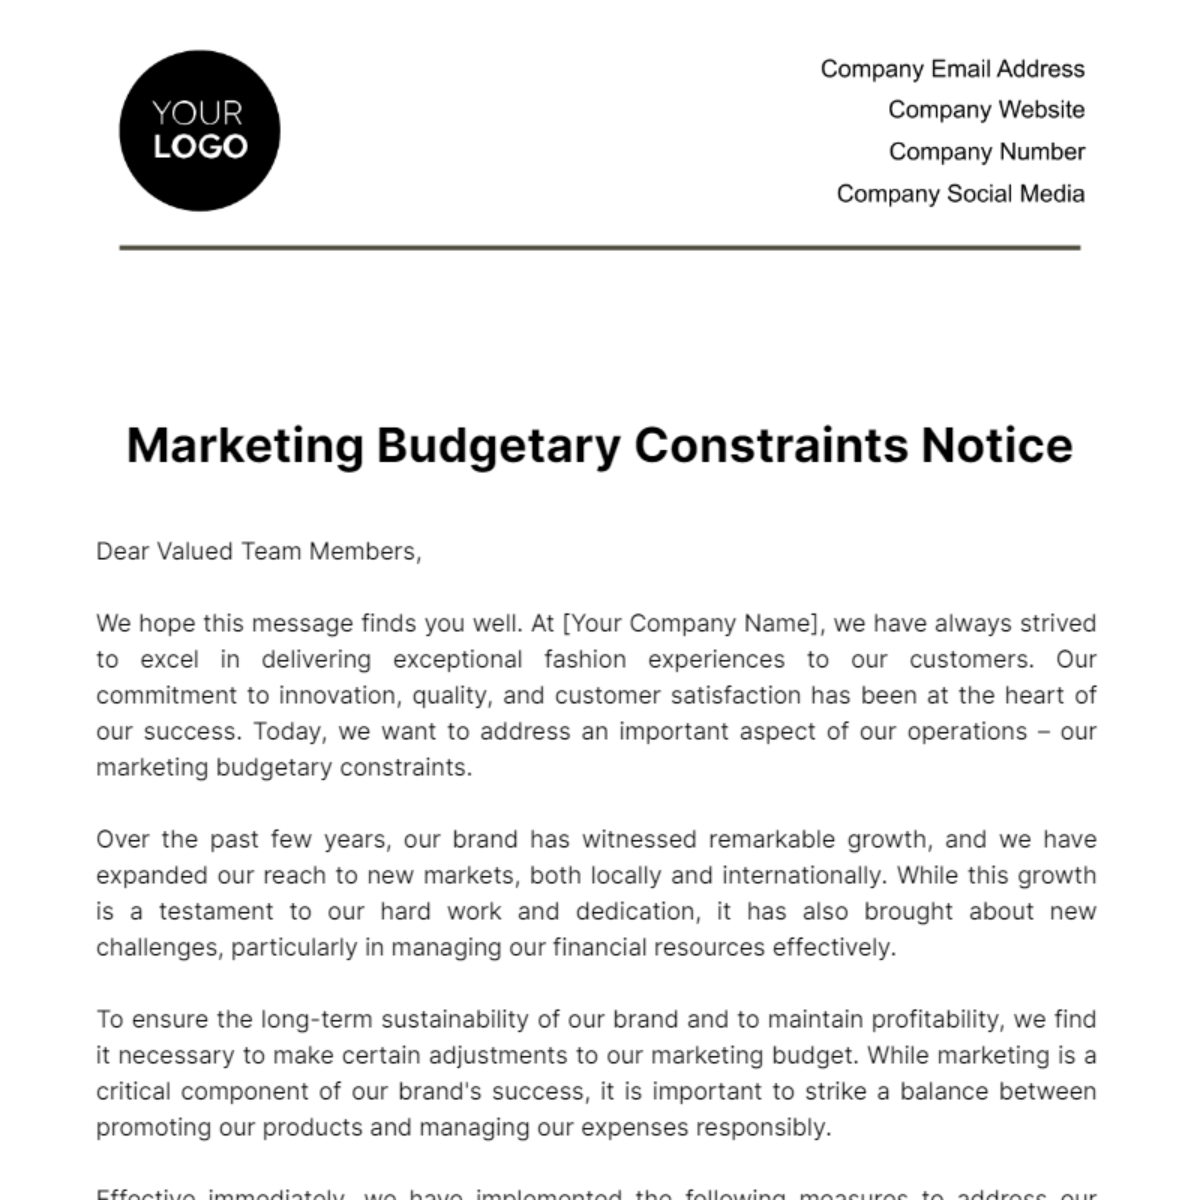 Free Marketing Budgetary Constraints Notice Template